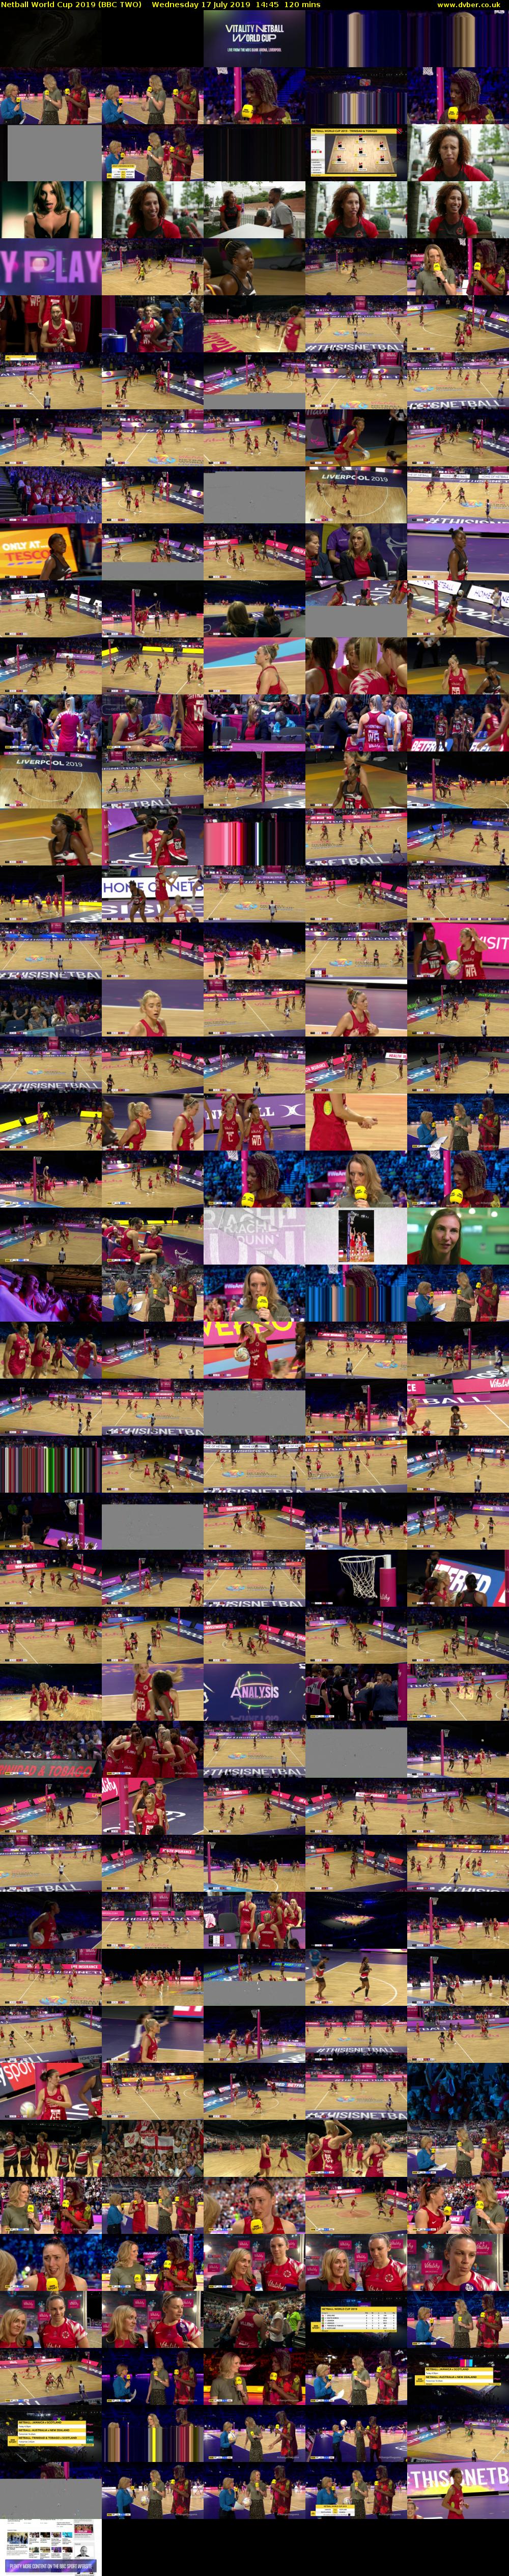 Netball World Cup 2019 (BBC TWO) Wednesday 17 July 2019 14:45 - 16:45